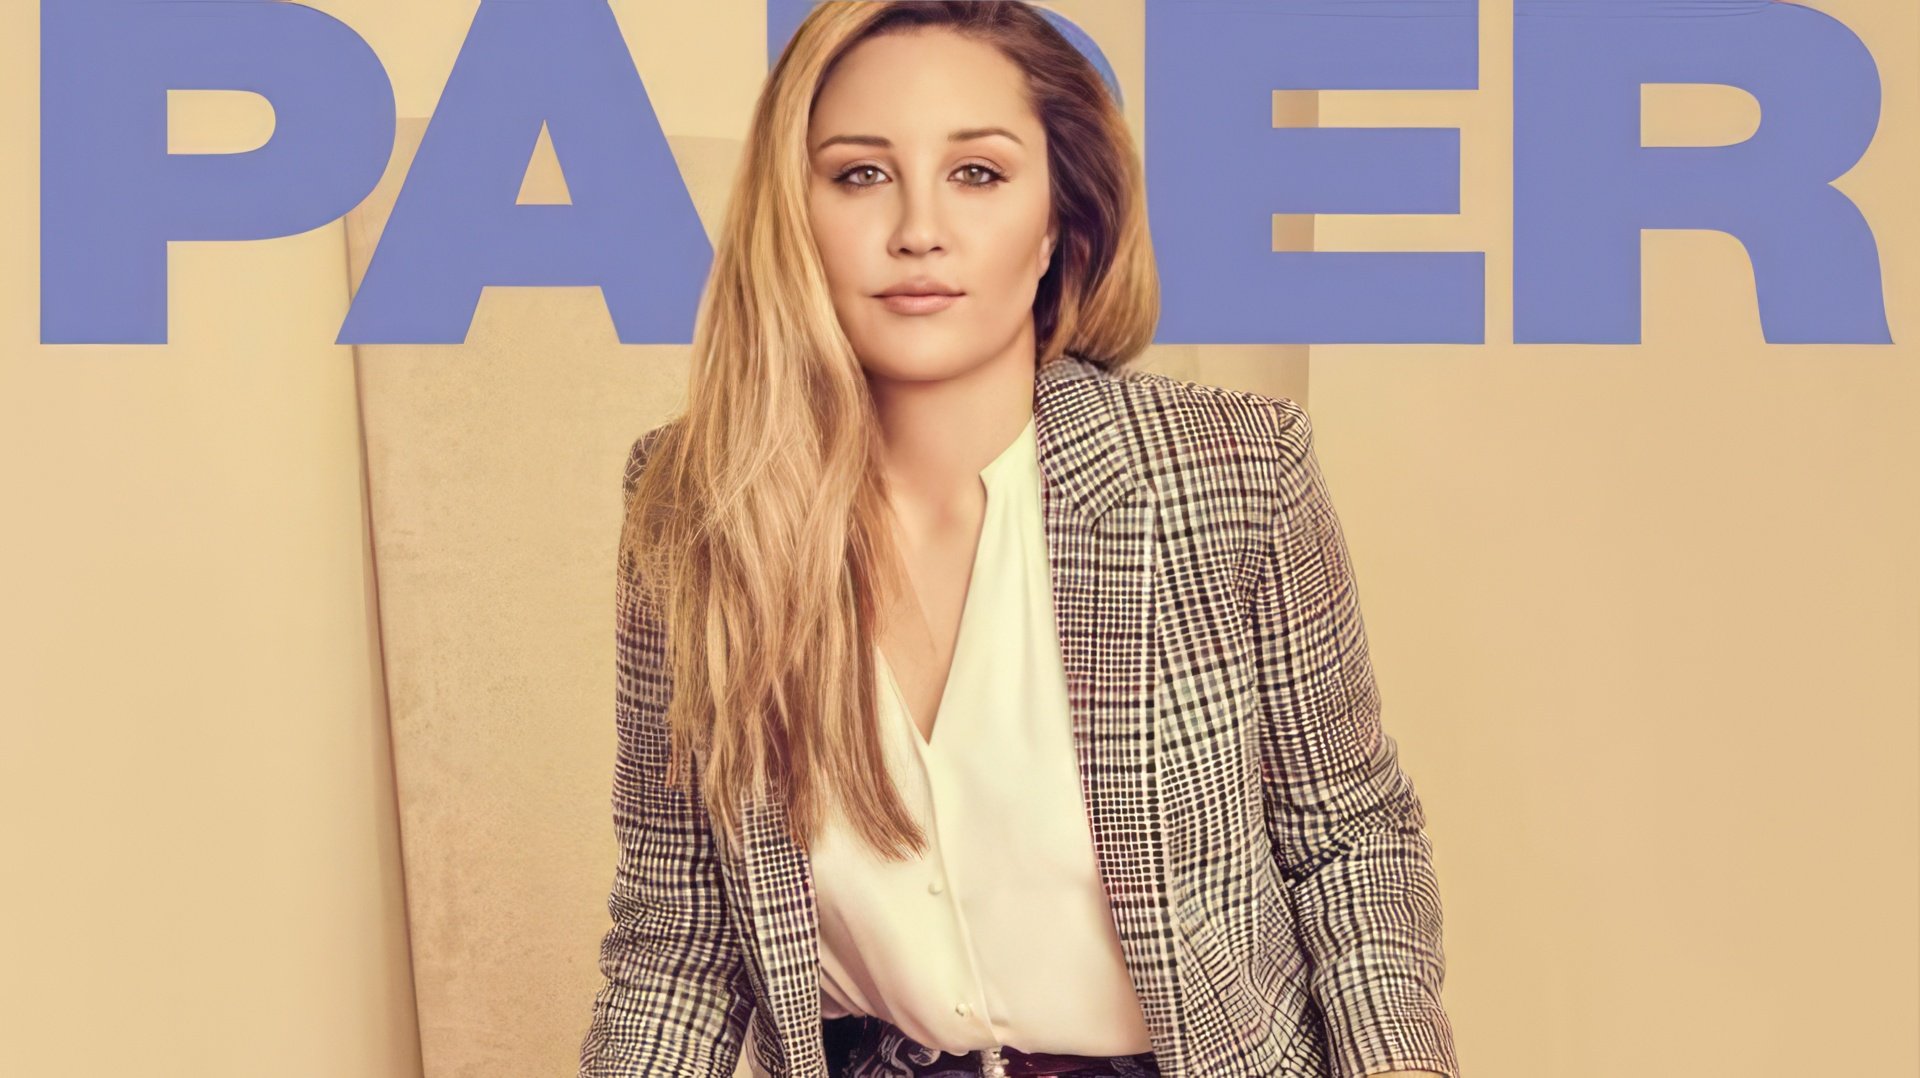 The slimmed-down Amanda Bynes in Paper magazine